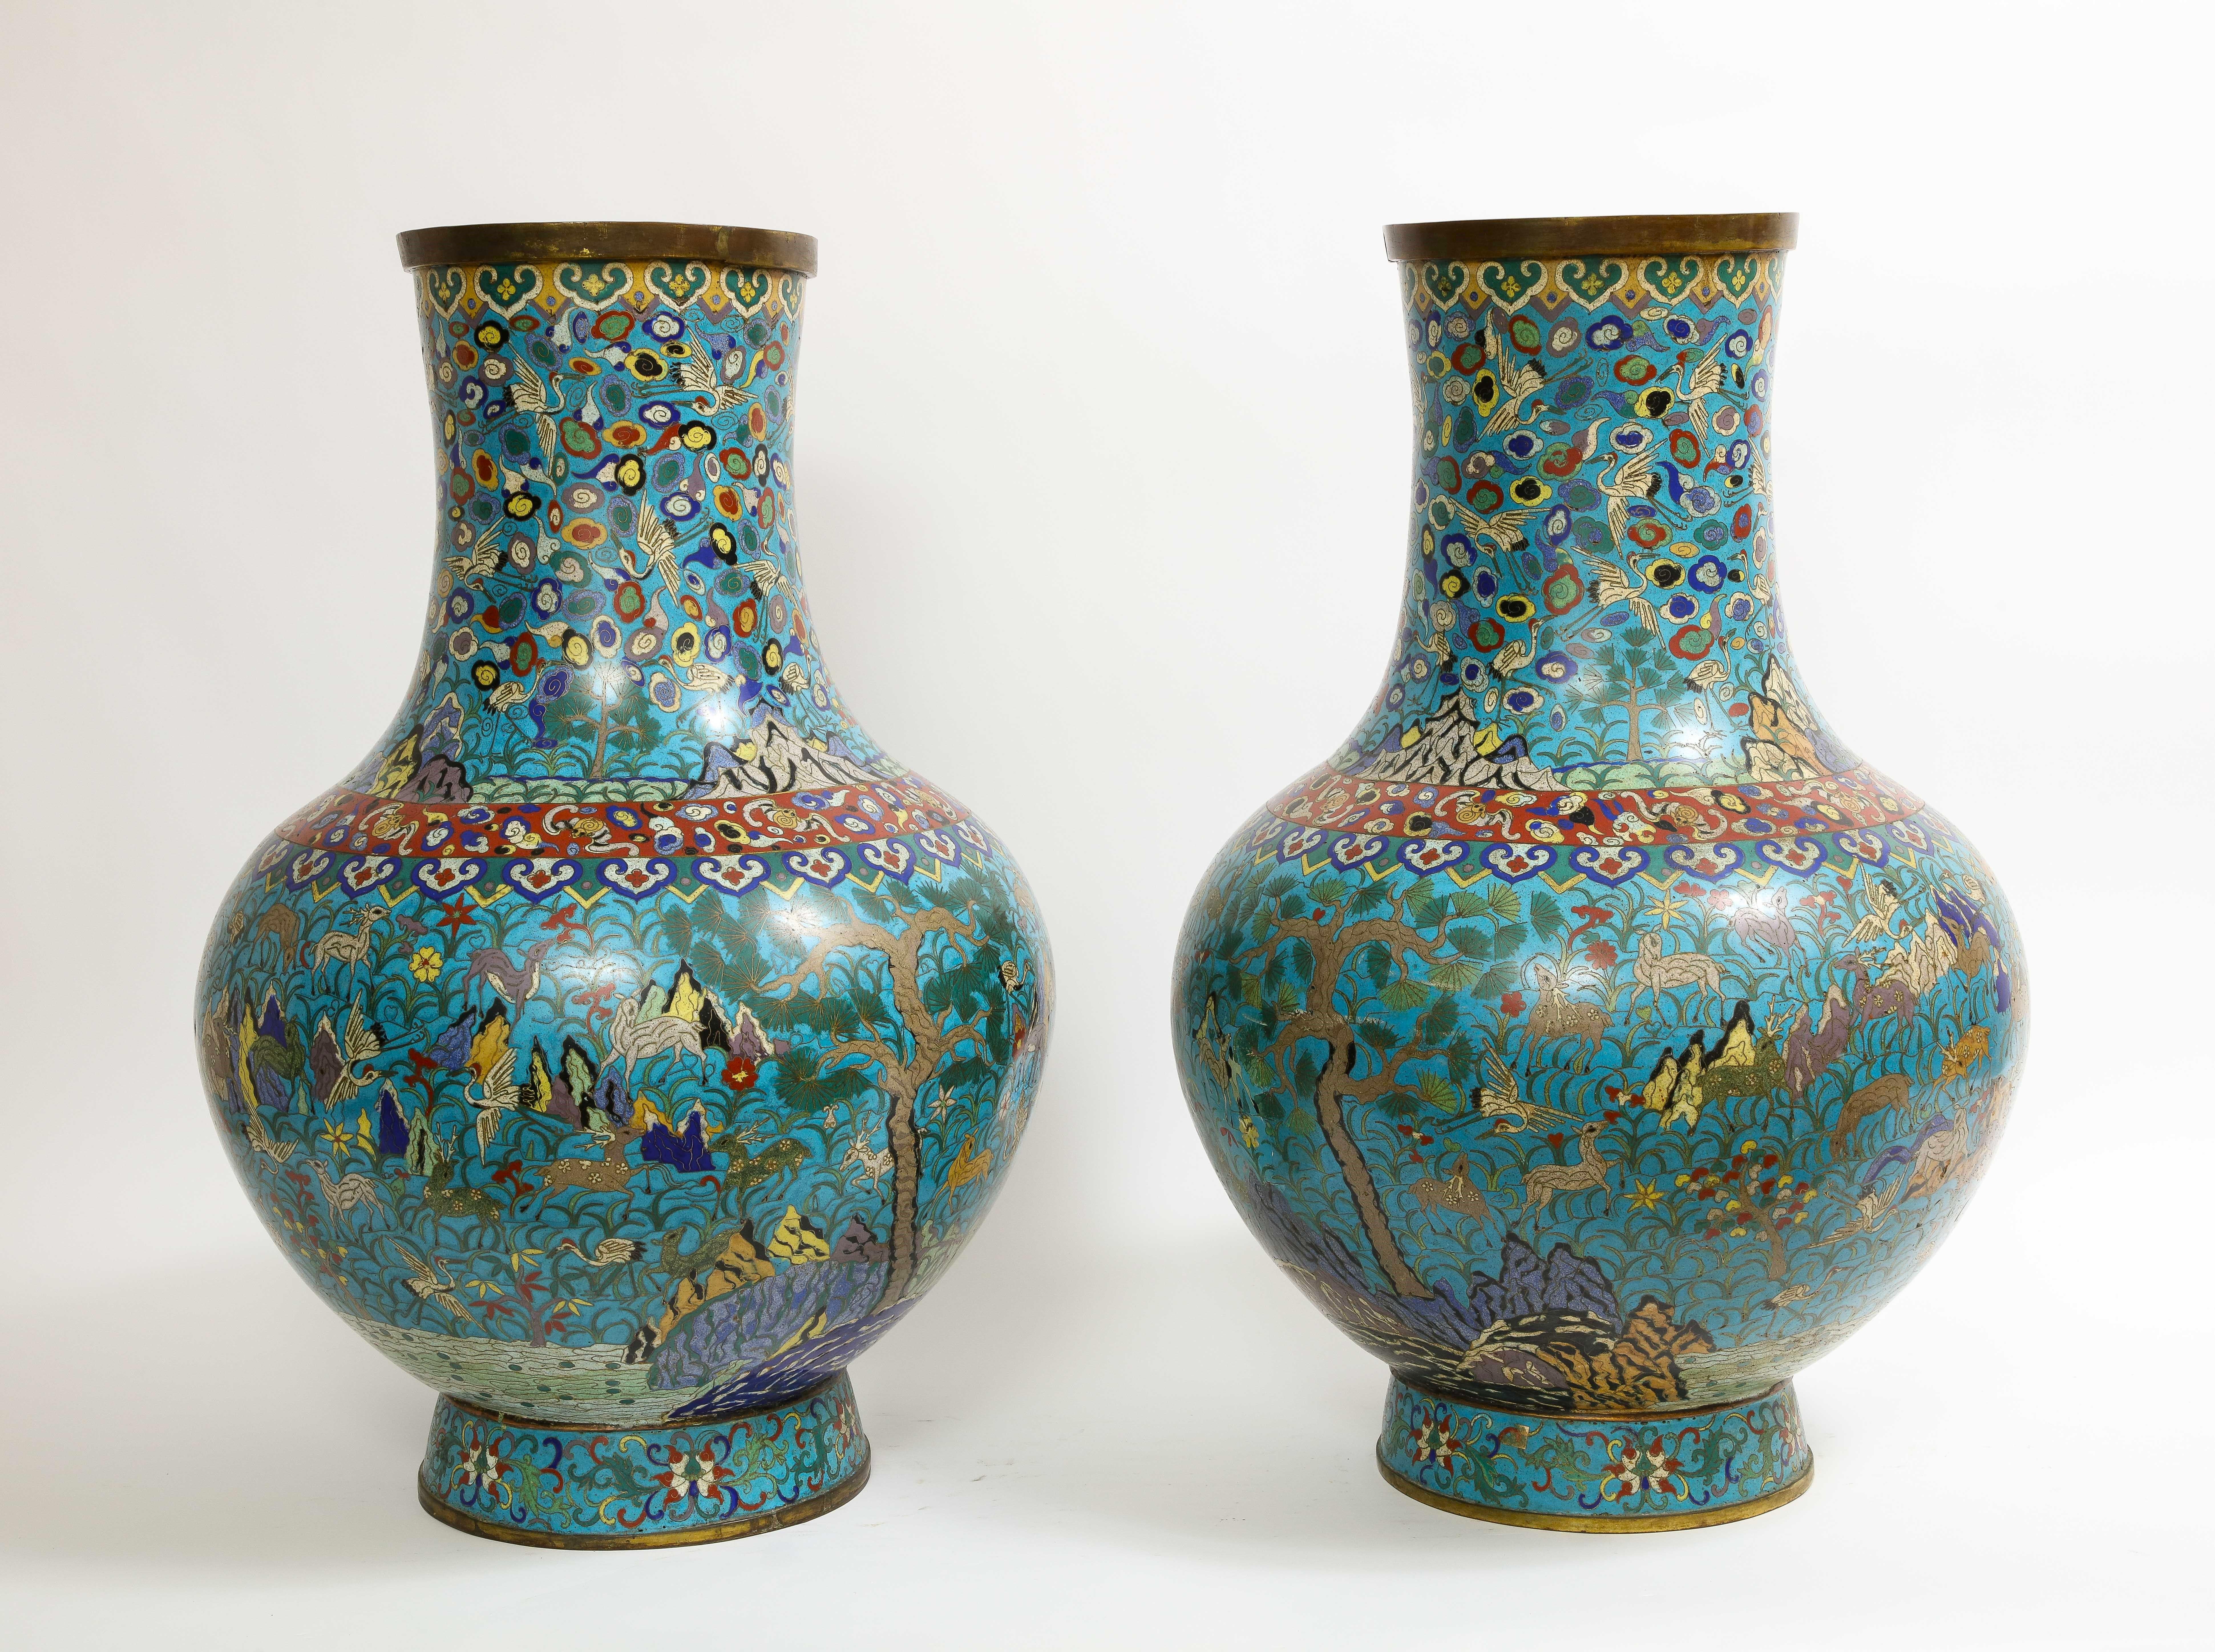 Qing Massive Pair of 19th C. Chinese Cloisonne Enamel Vases with Deer Decoration For Sale